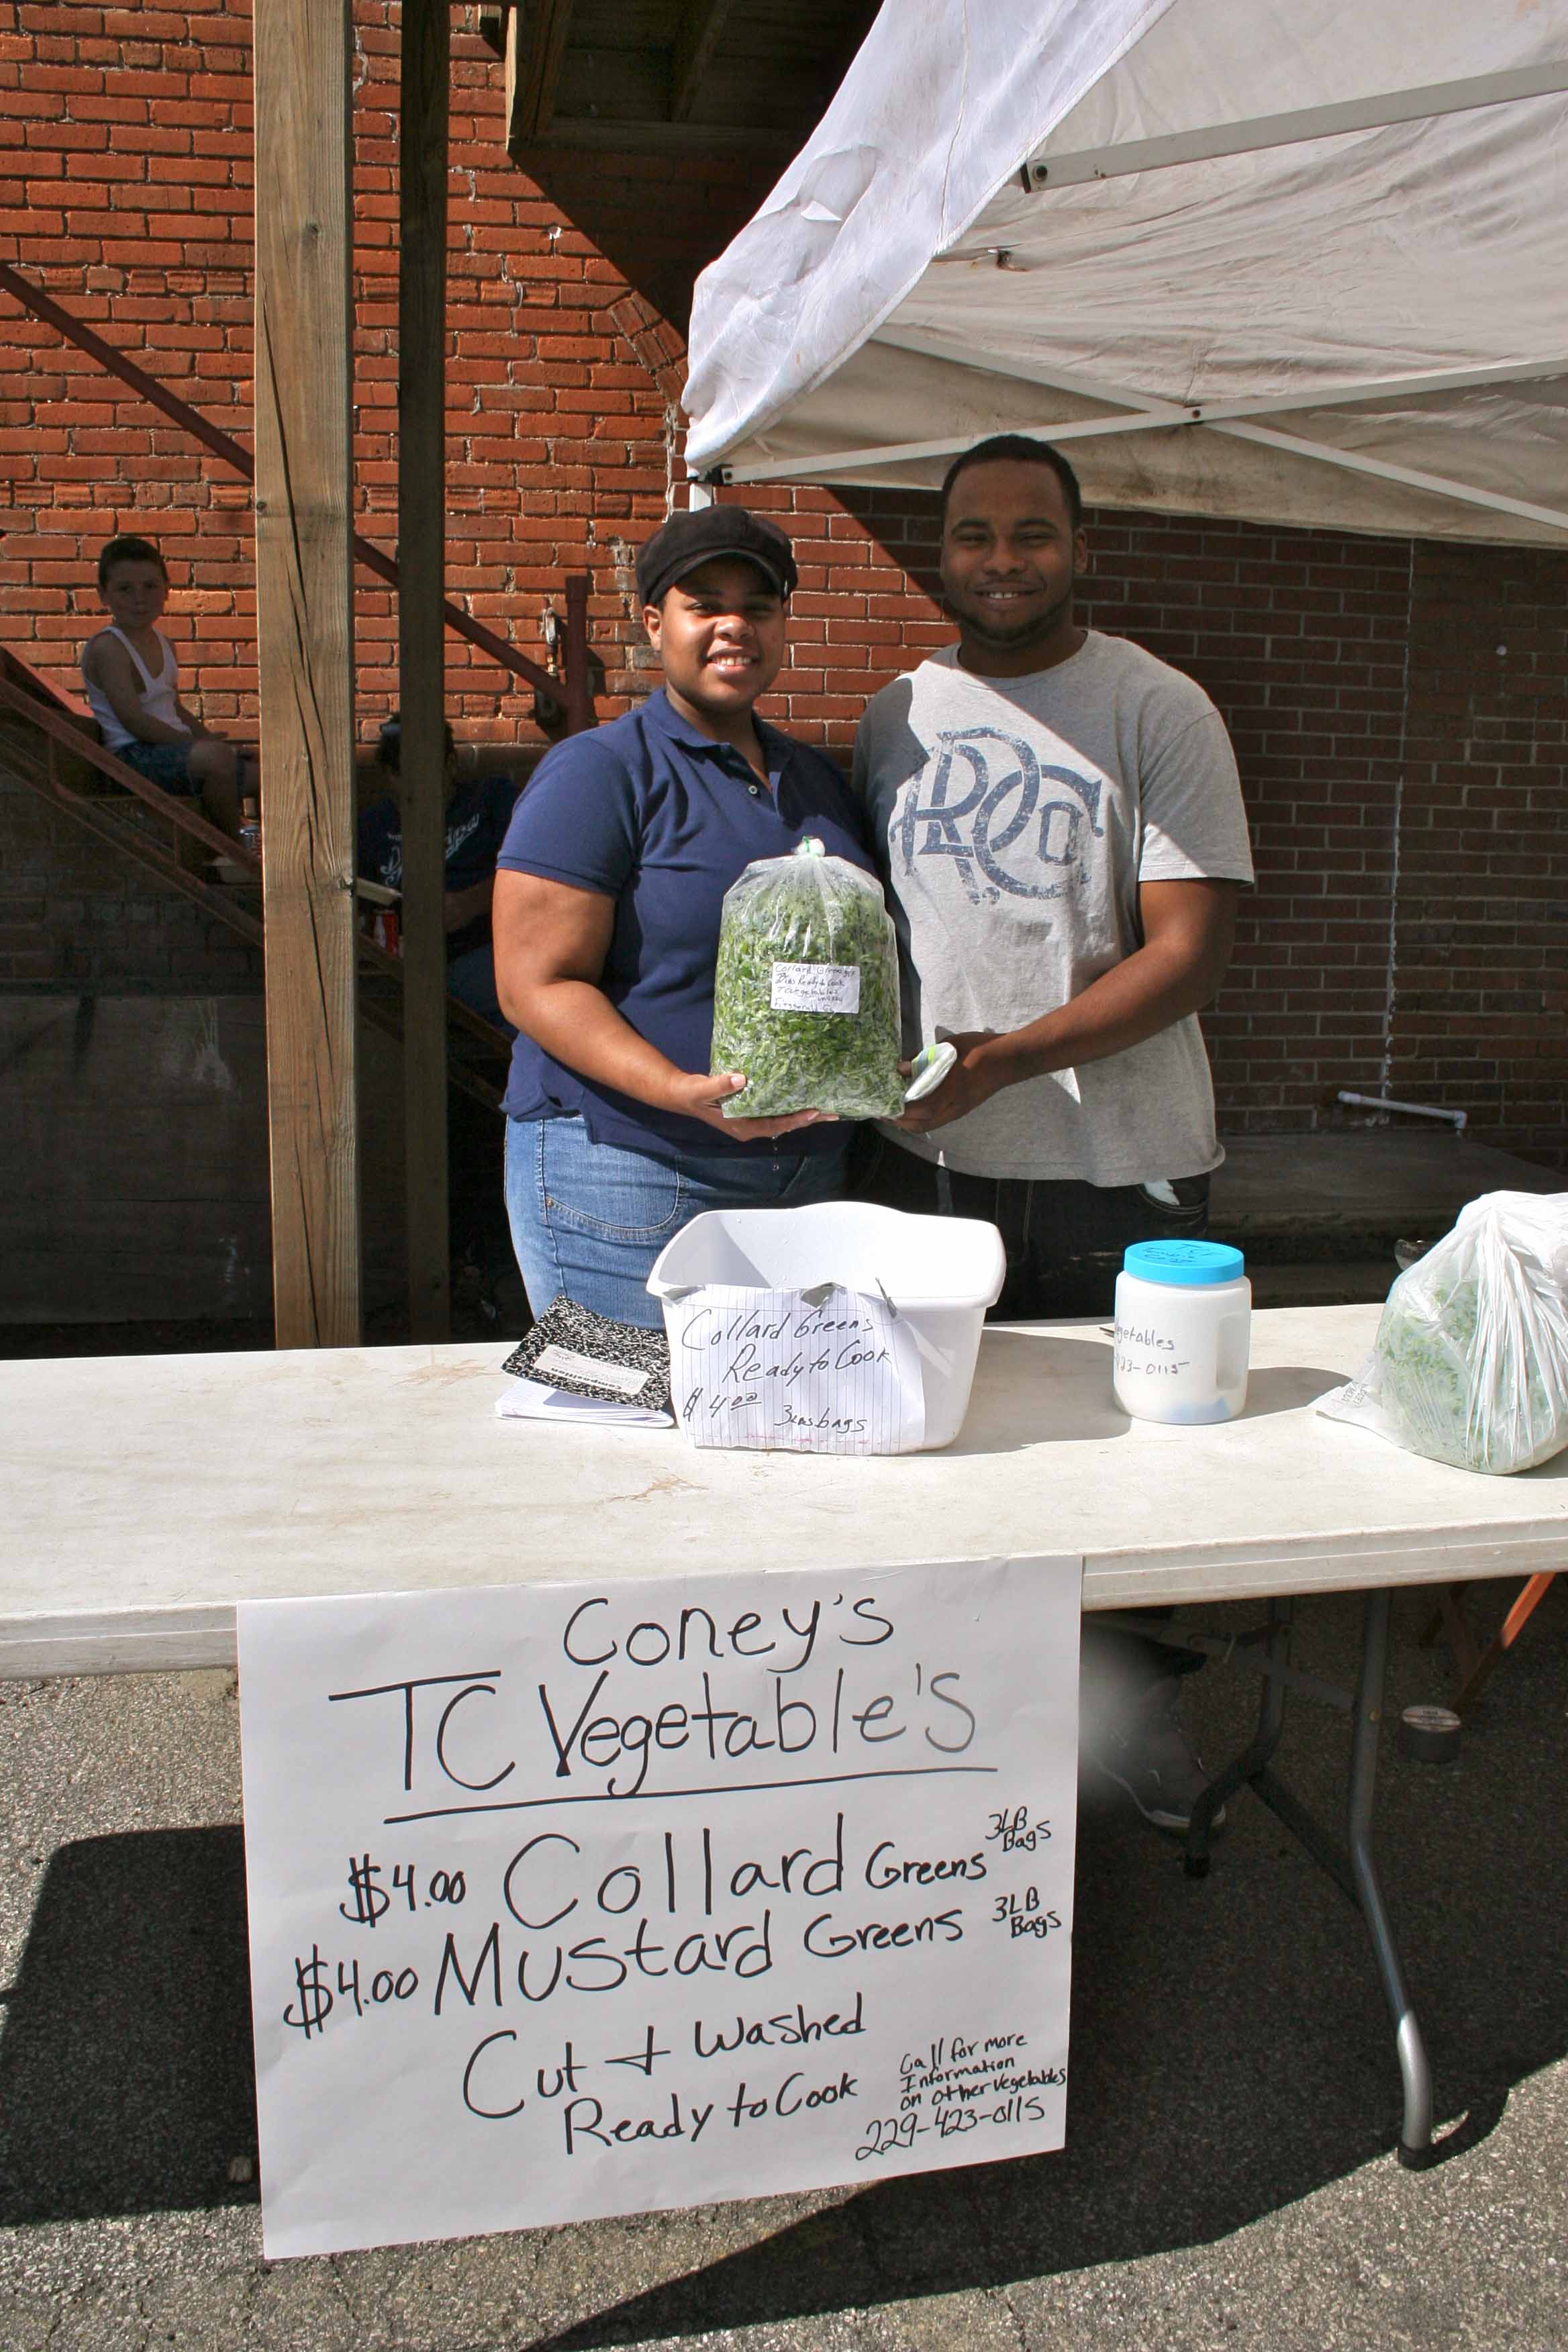 Tempest Coney and Randall Richardson of TC Coney Vegetables at the downtown farmers market in Tifton, Ga.